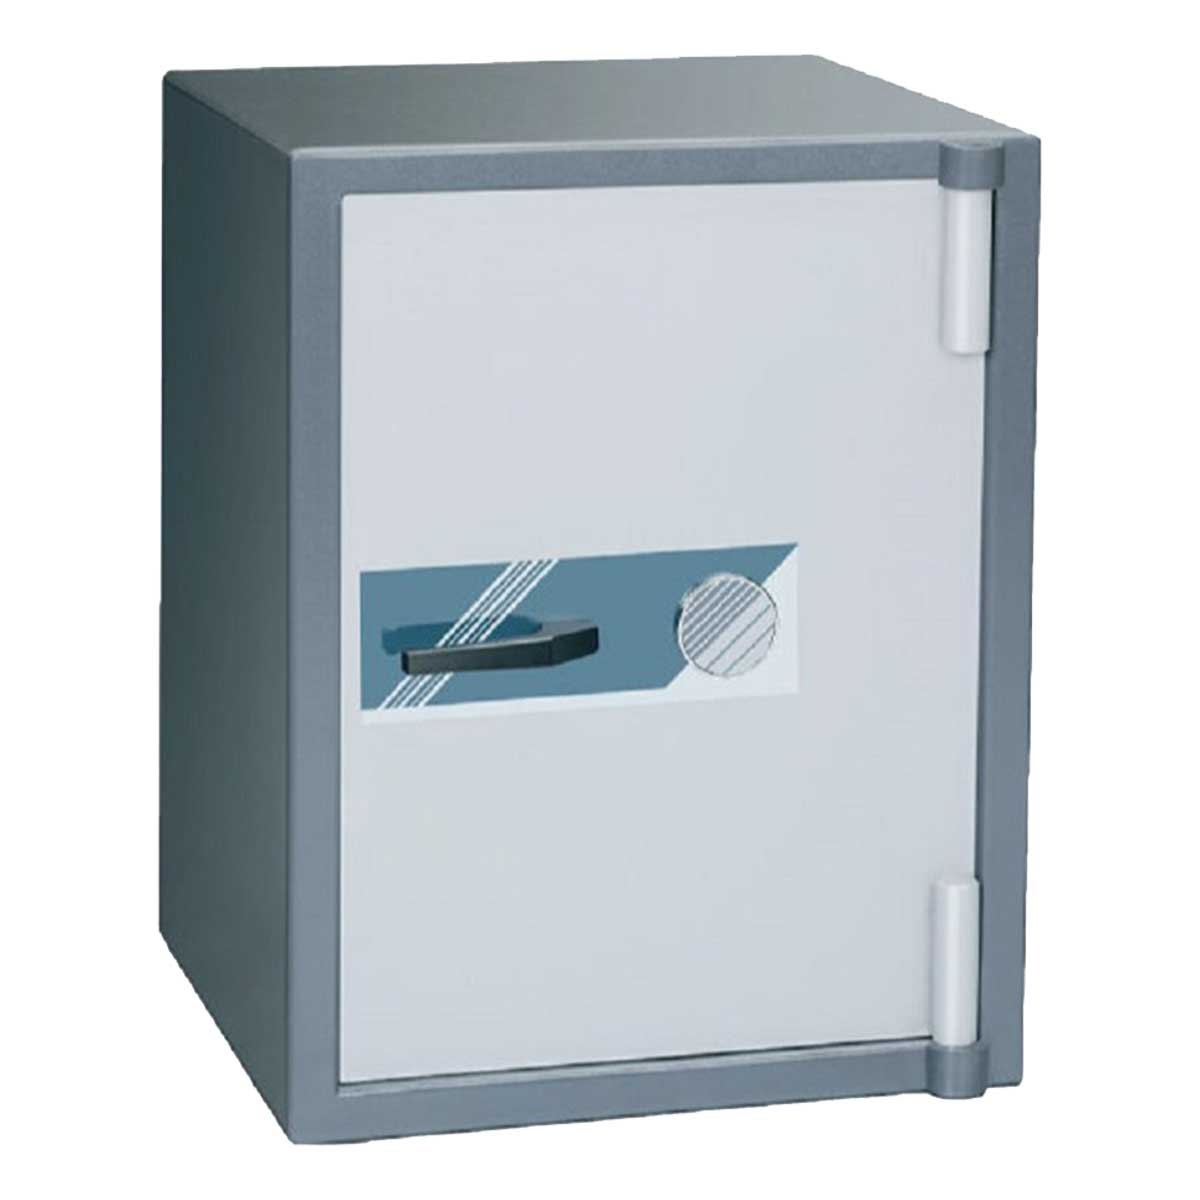 Burglary Safes Manufacturers, Suppliers in Alaknanda